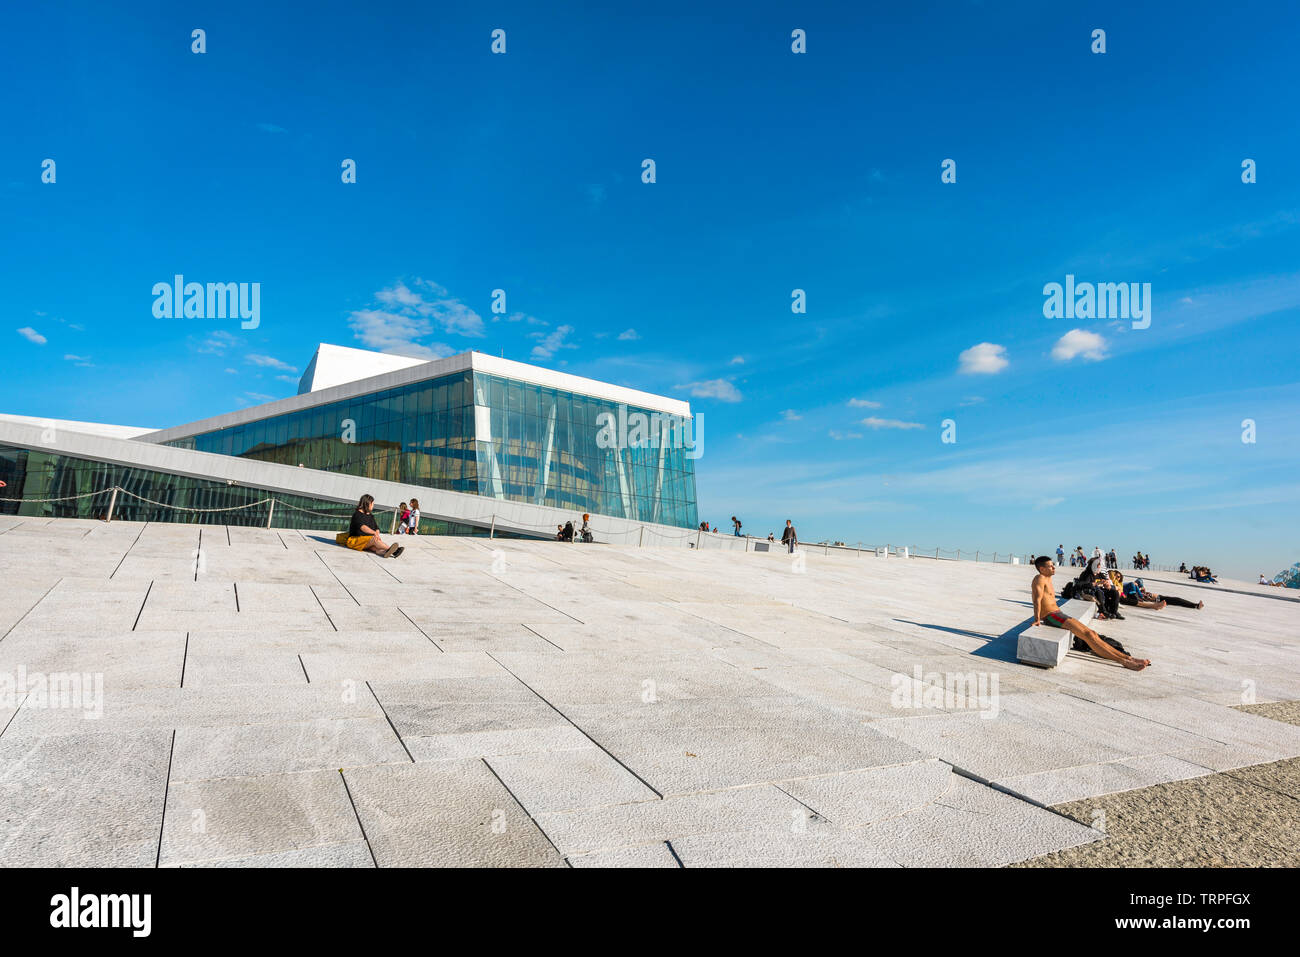 Opera House Oslo, view in summer of people sunbathing along the waterfront concourse of the Oslo Opera House, Norway. Stock Photo